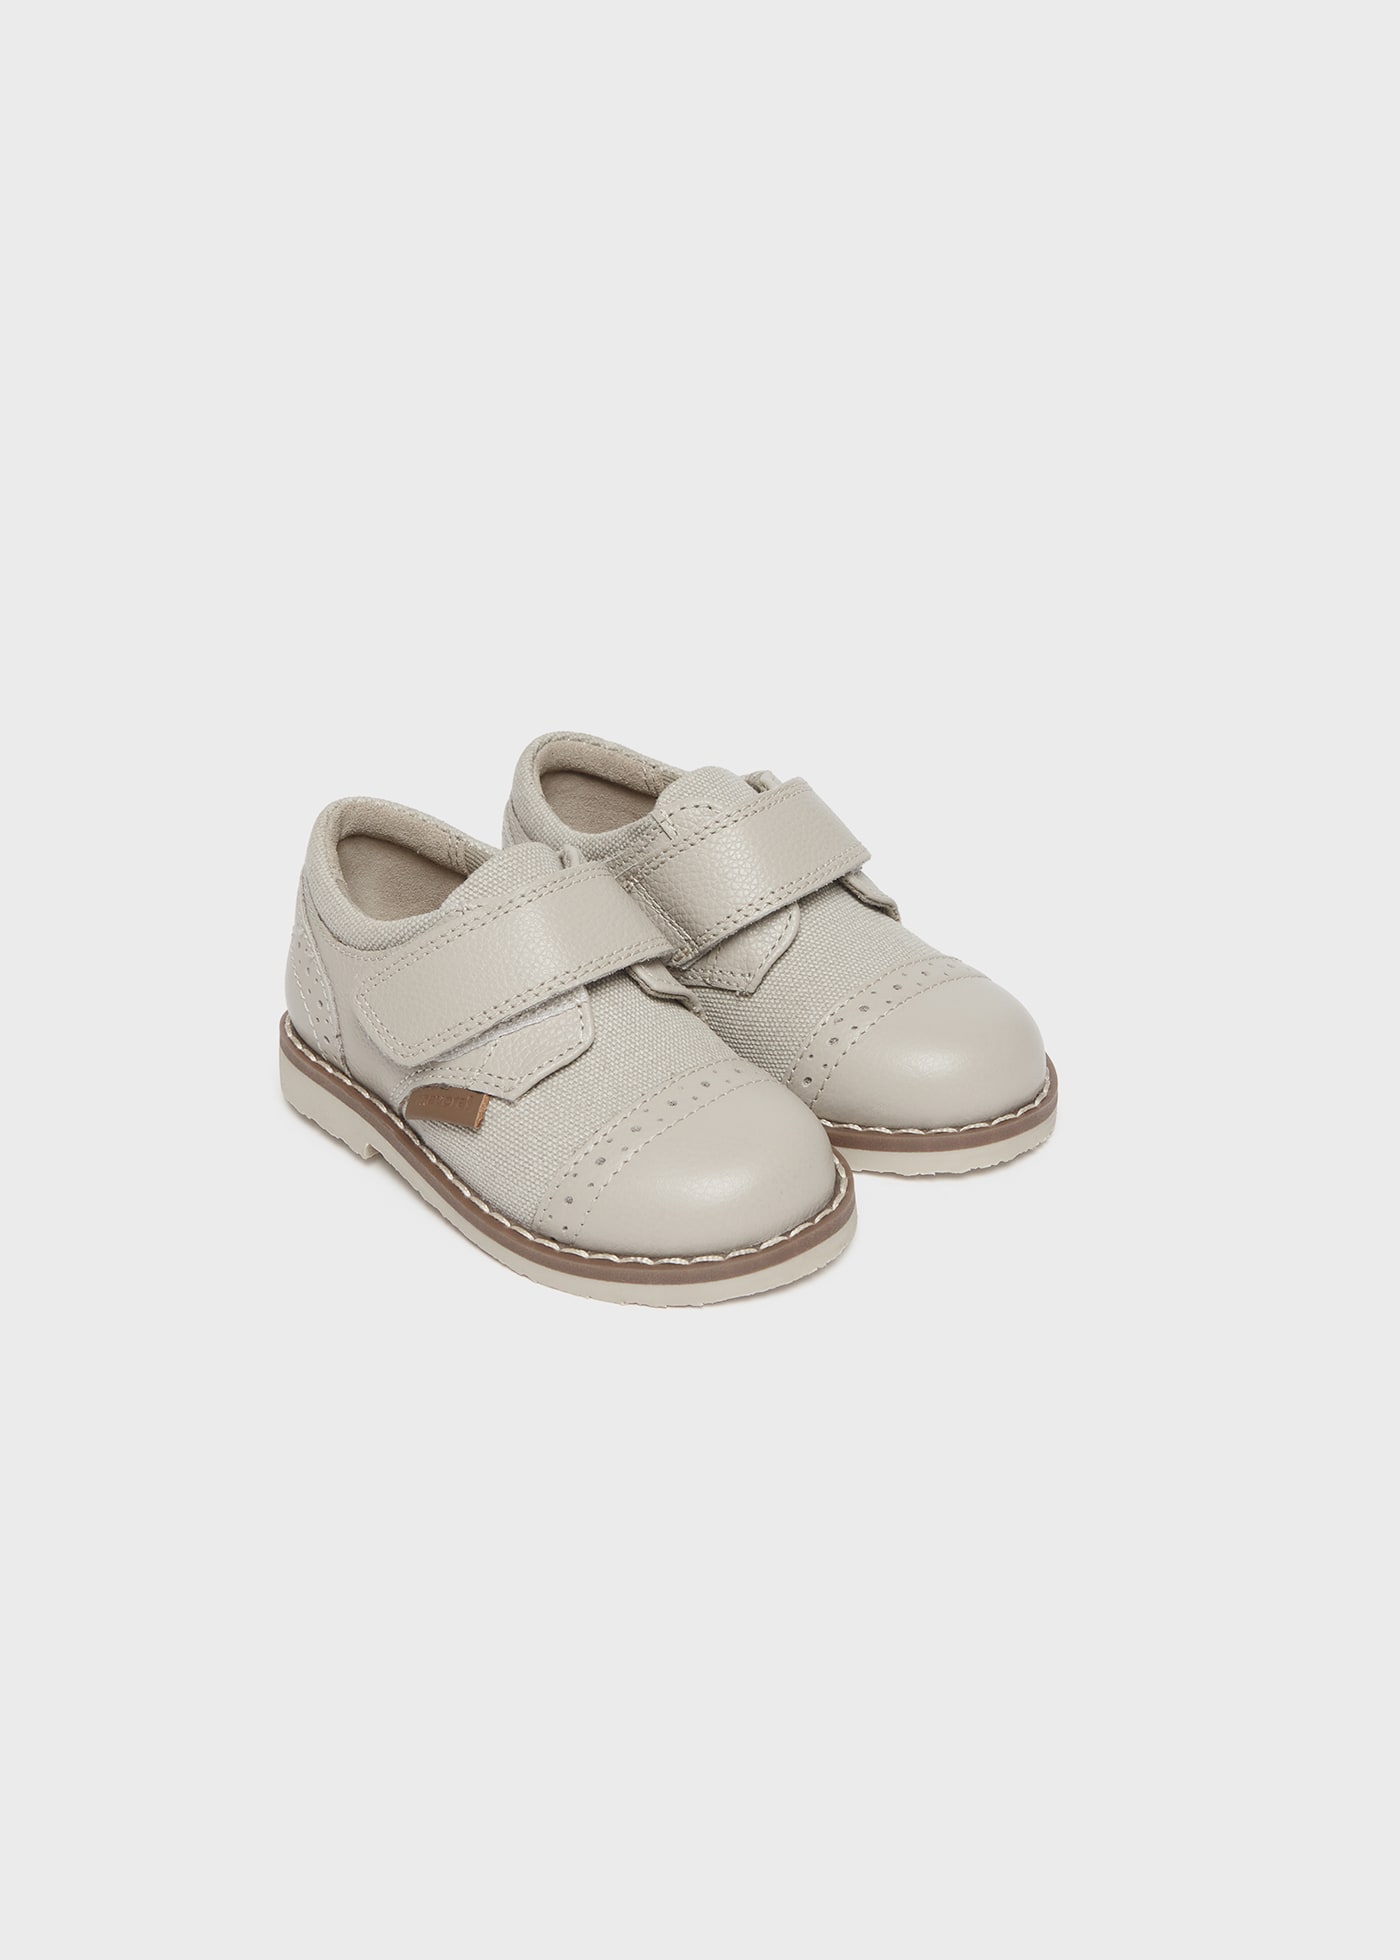 Baby Oxford Shoes Leather